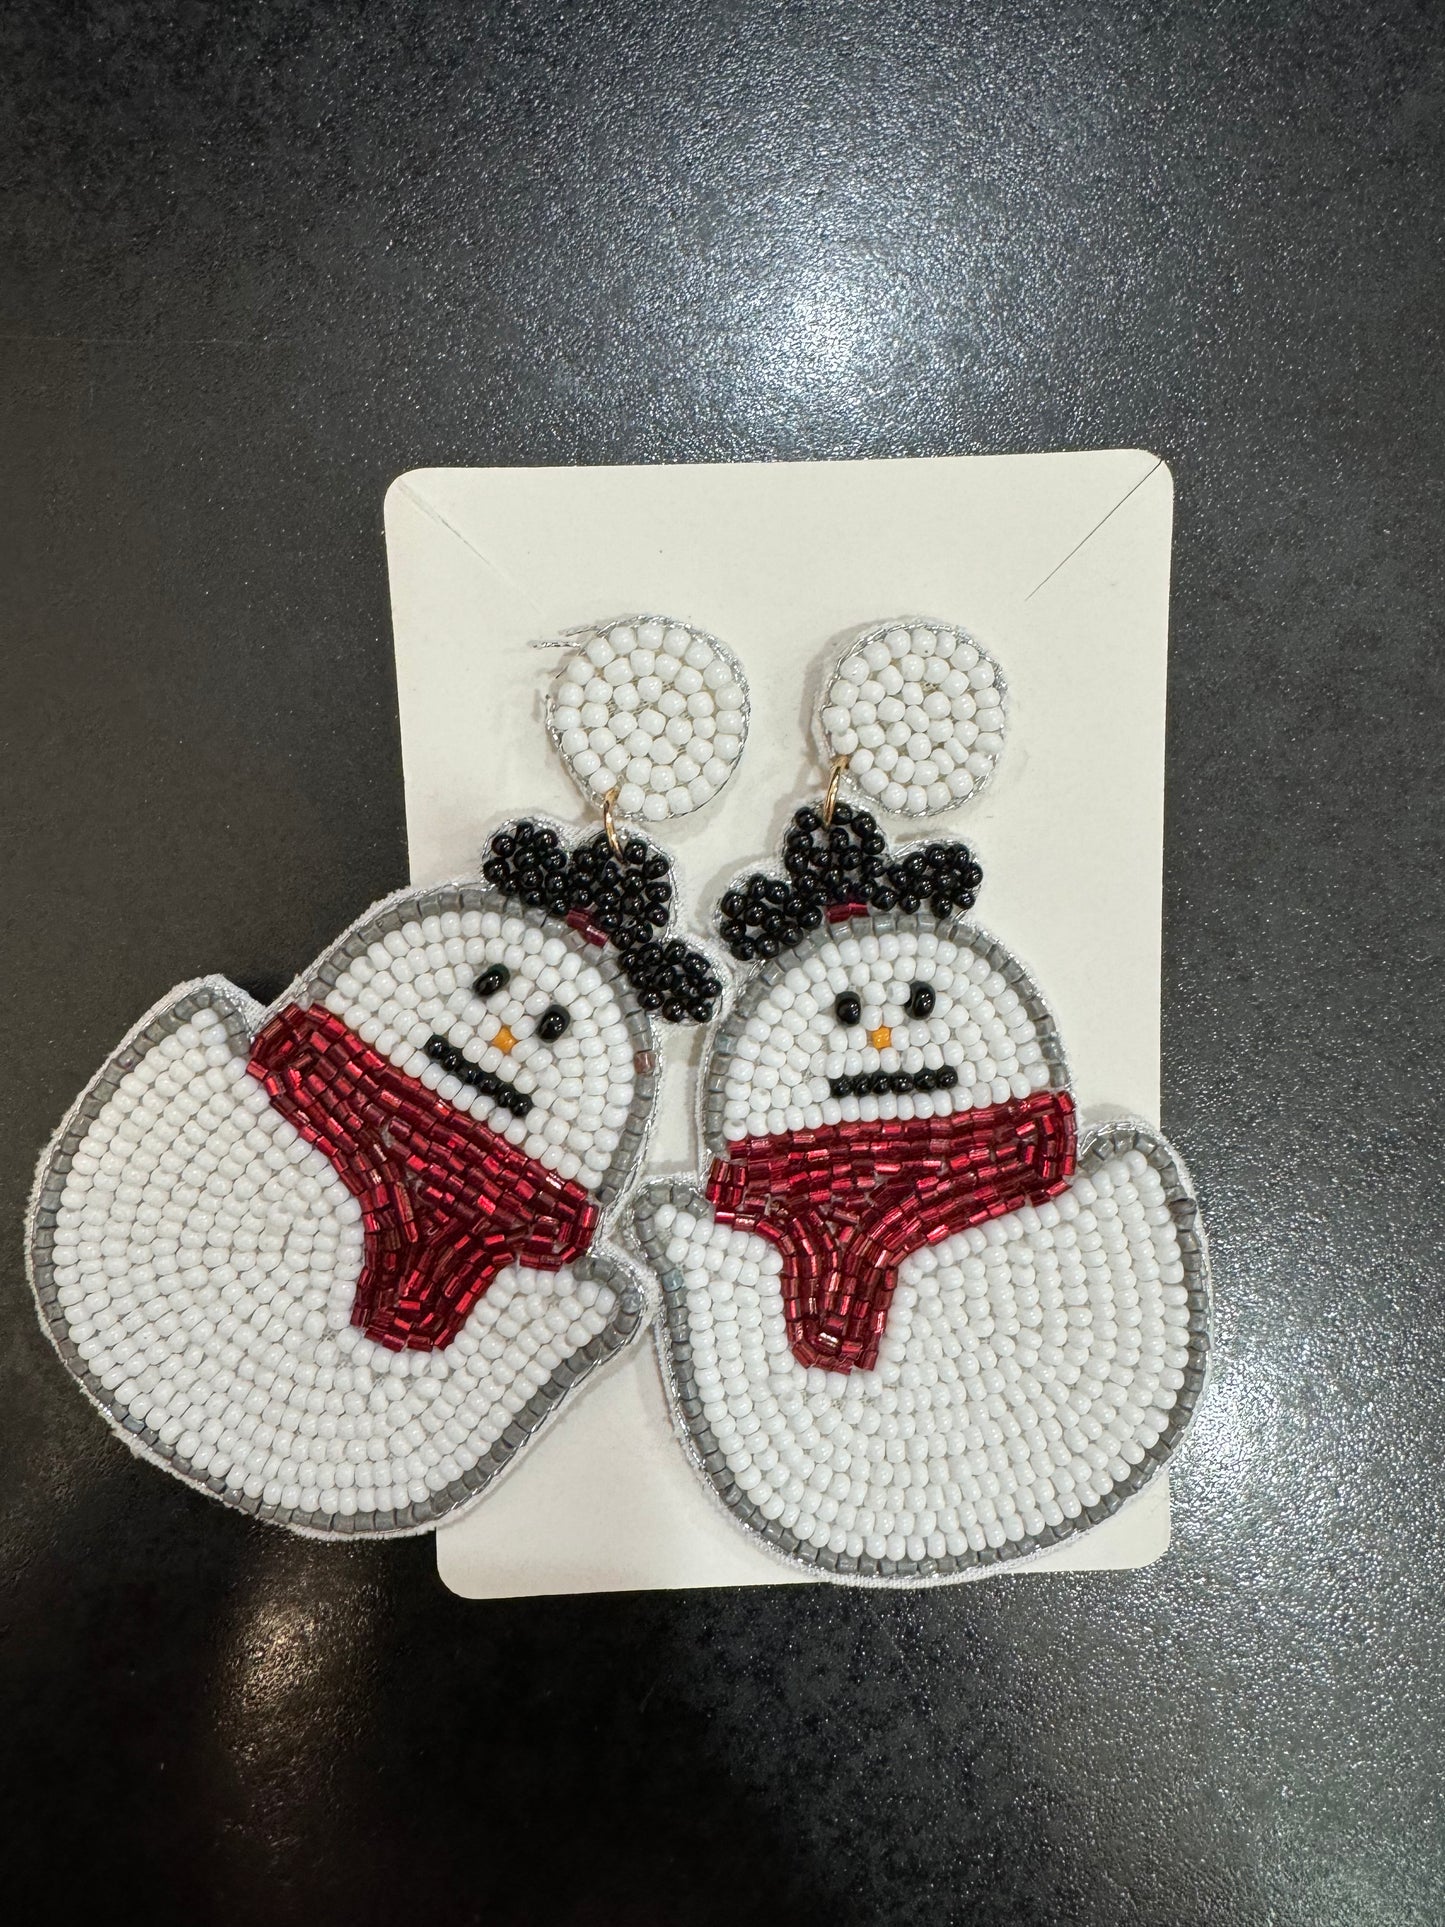 Chickie Collective's Snowman Beaded Earrings.